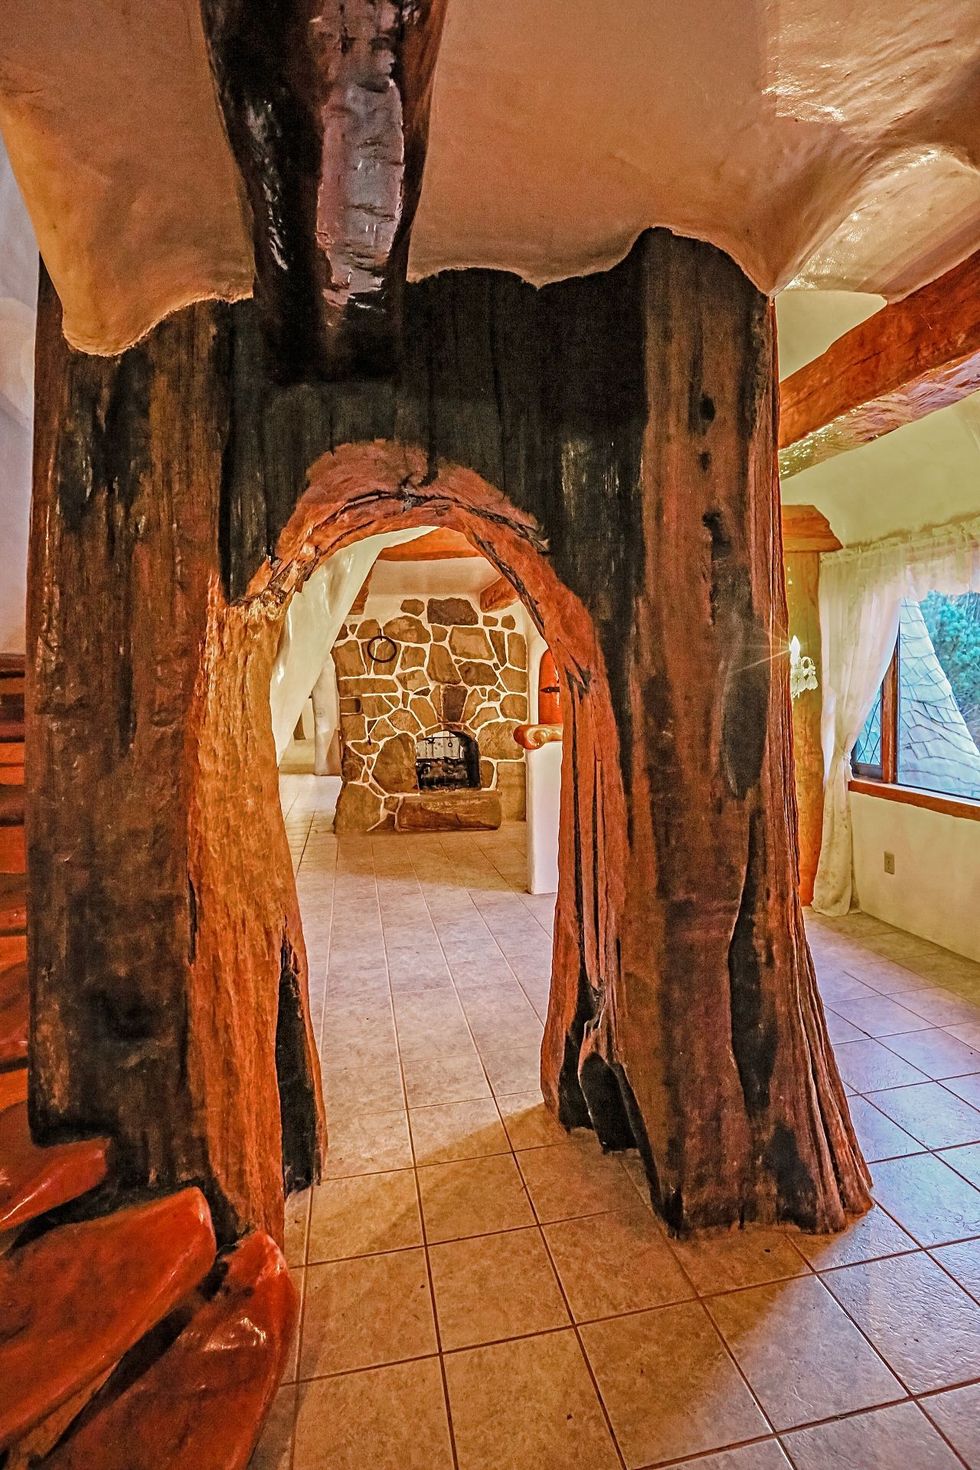 Arch, Tree, Architecture, Room, Interior design, Building, Art, Wood, Ceiling, House, 